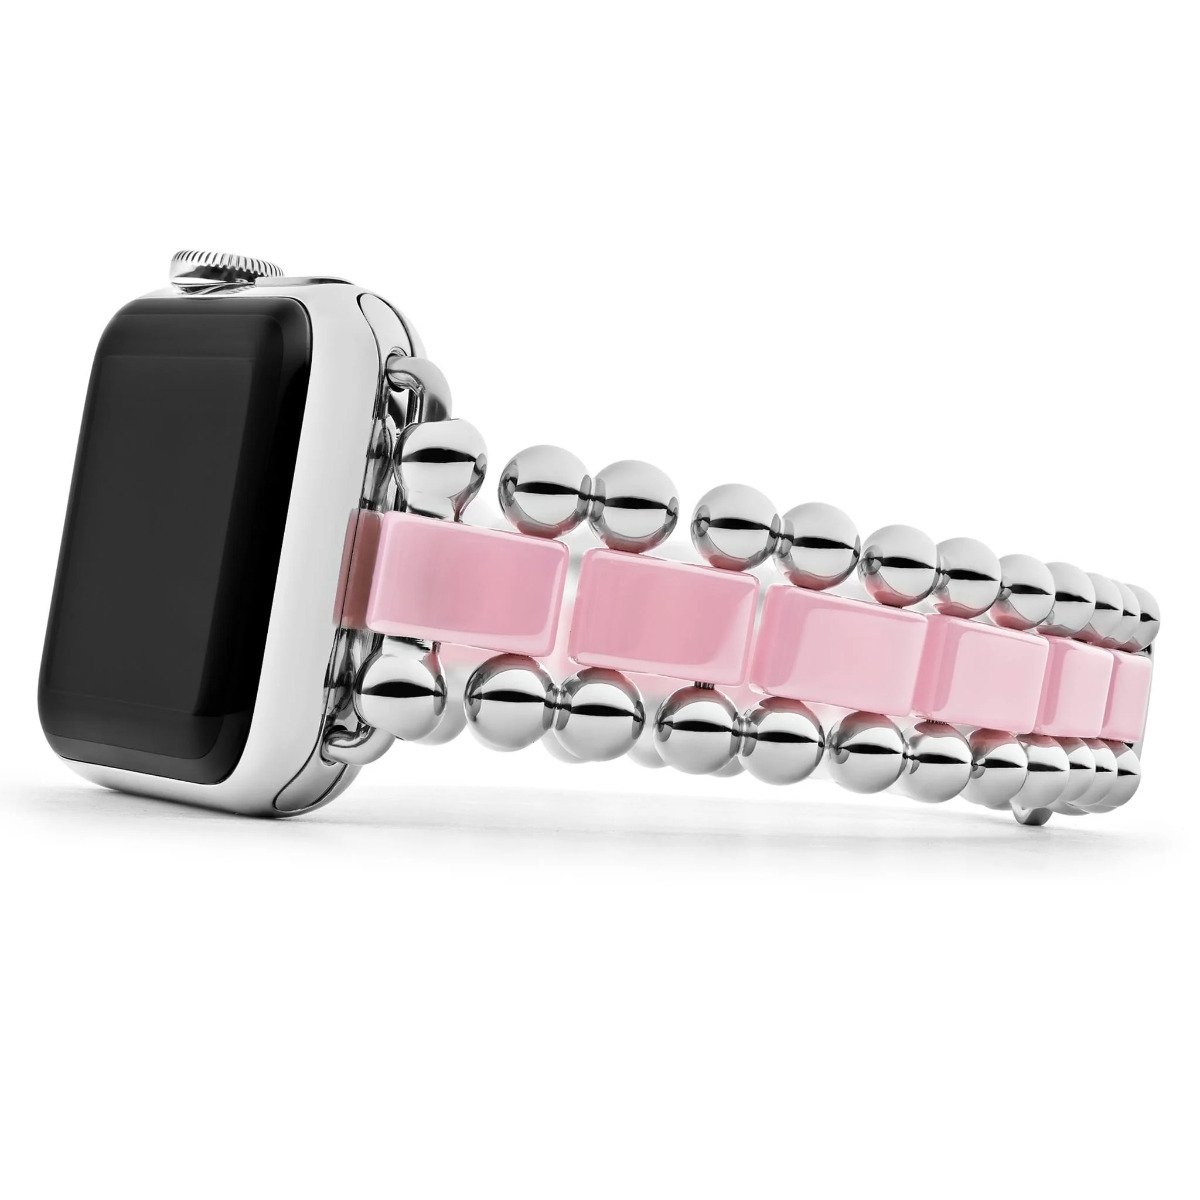 LAGOS "Smart Caviar" Pink Ceramic and Stainless Steel Watch Bracelet-38-45mm